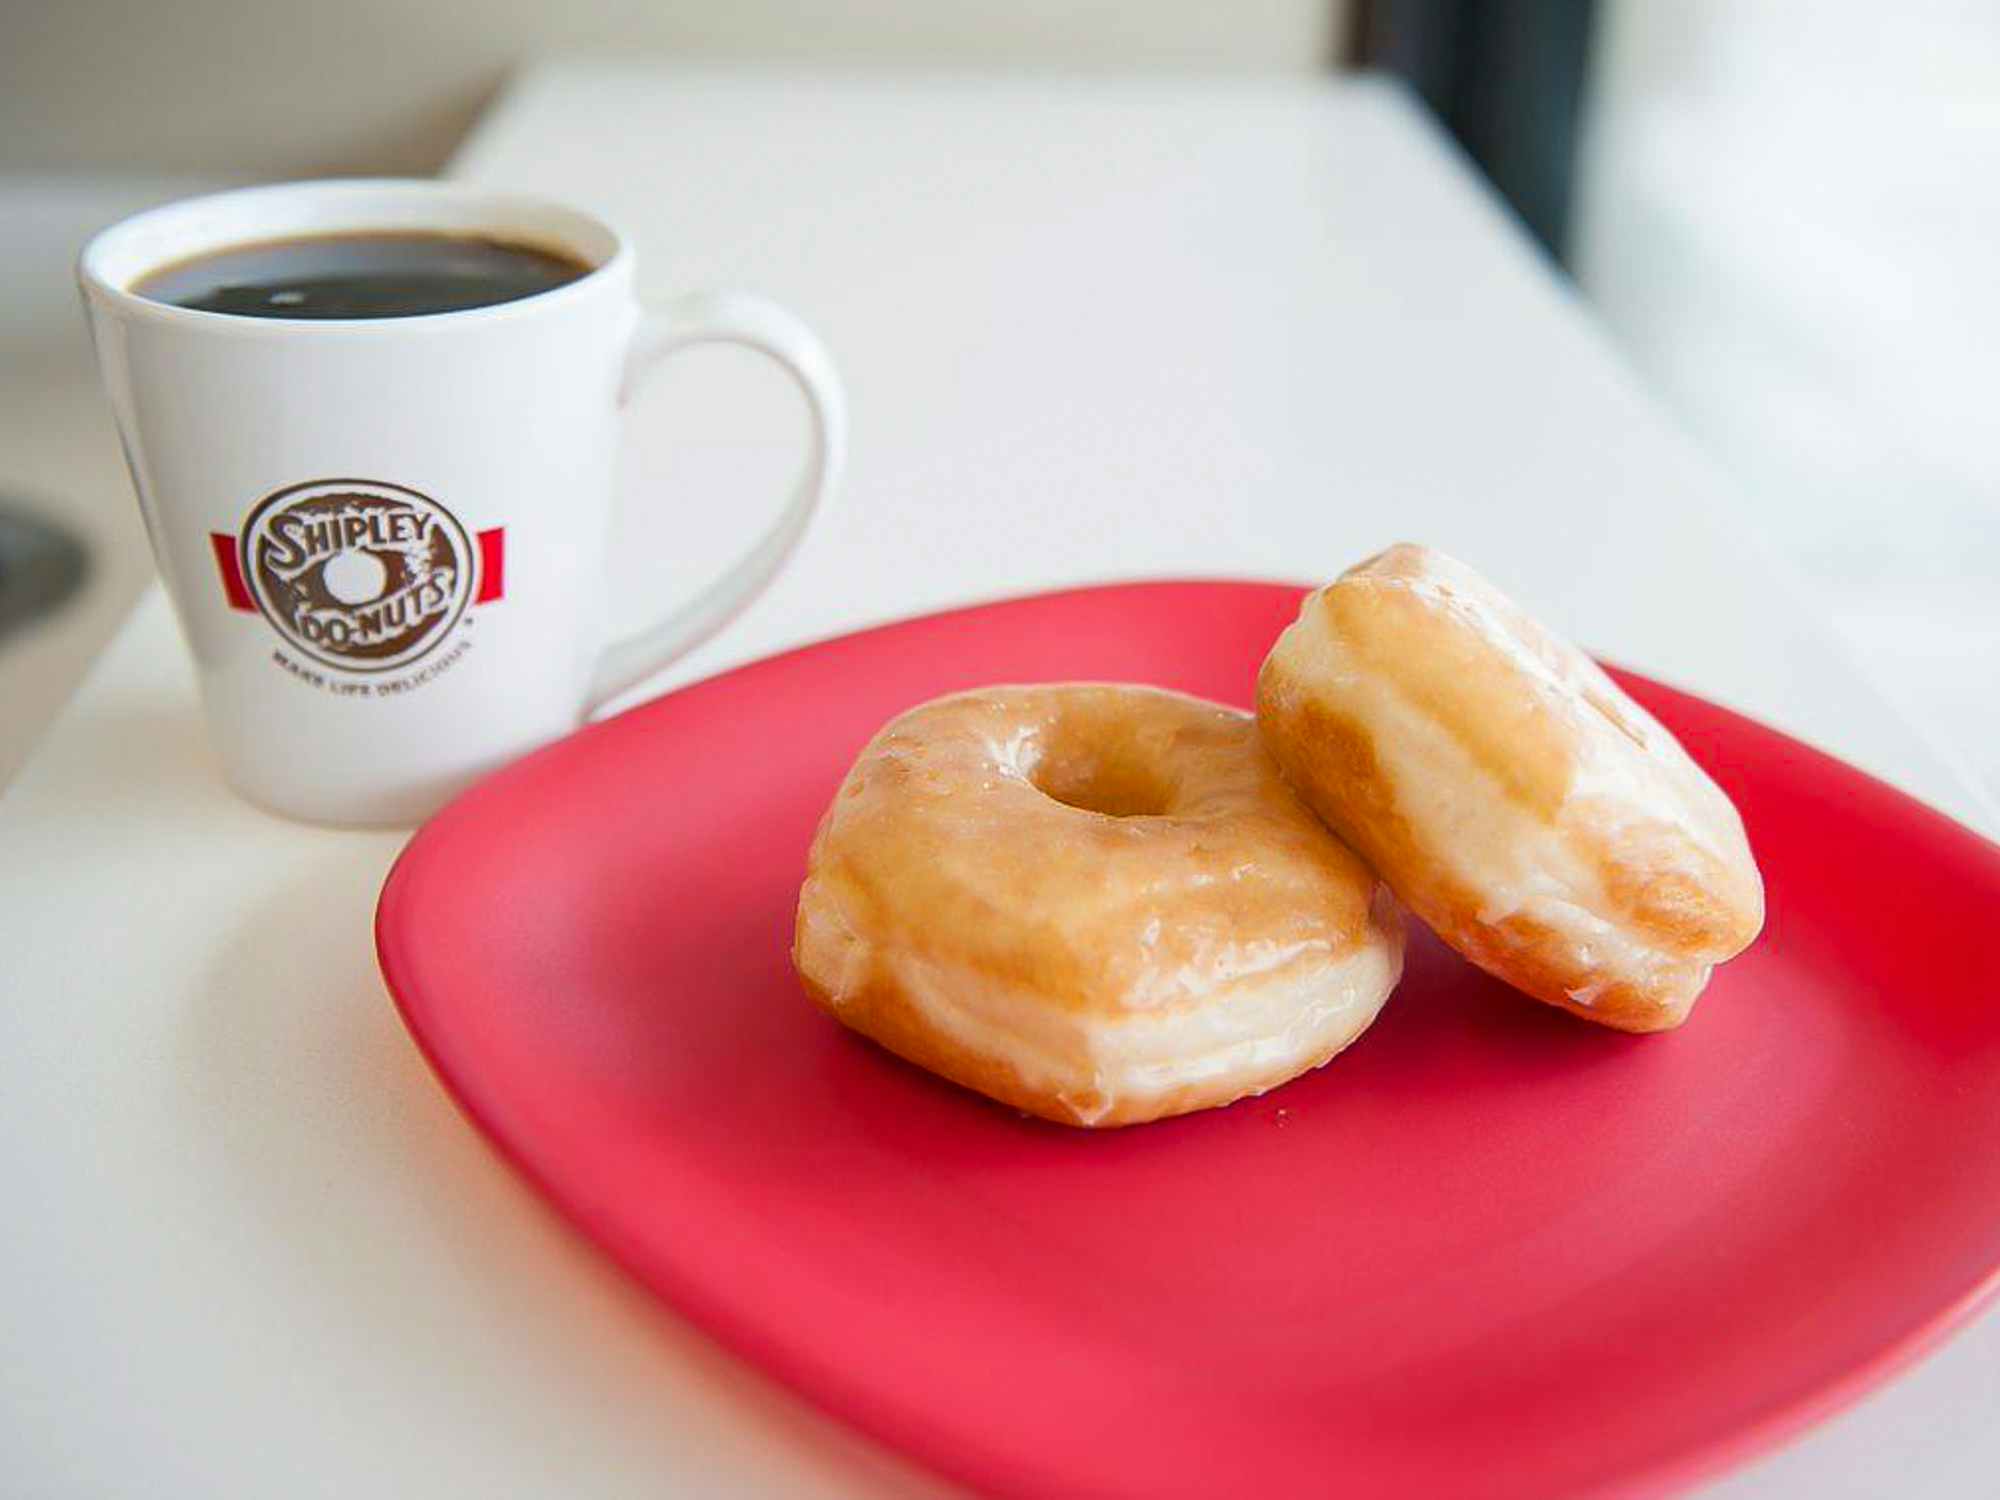 Some Shipley Do-nut doughnuts on a plate next to a cup of coffee